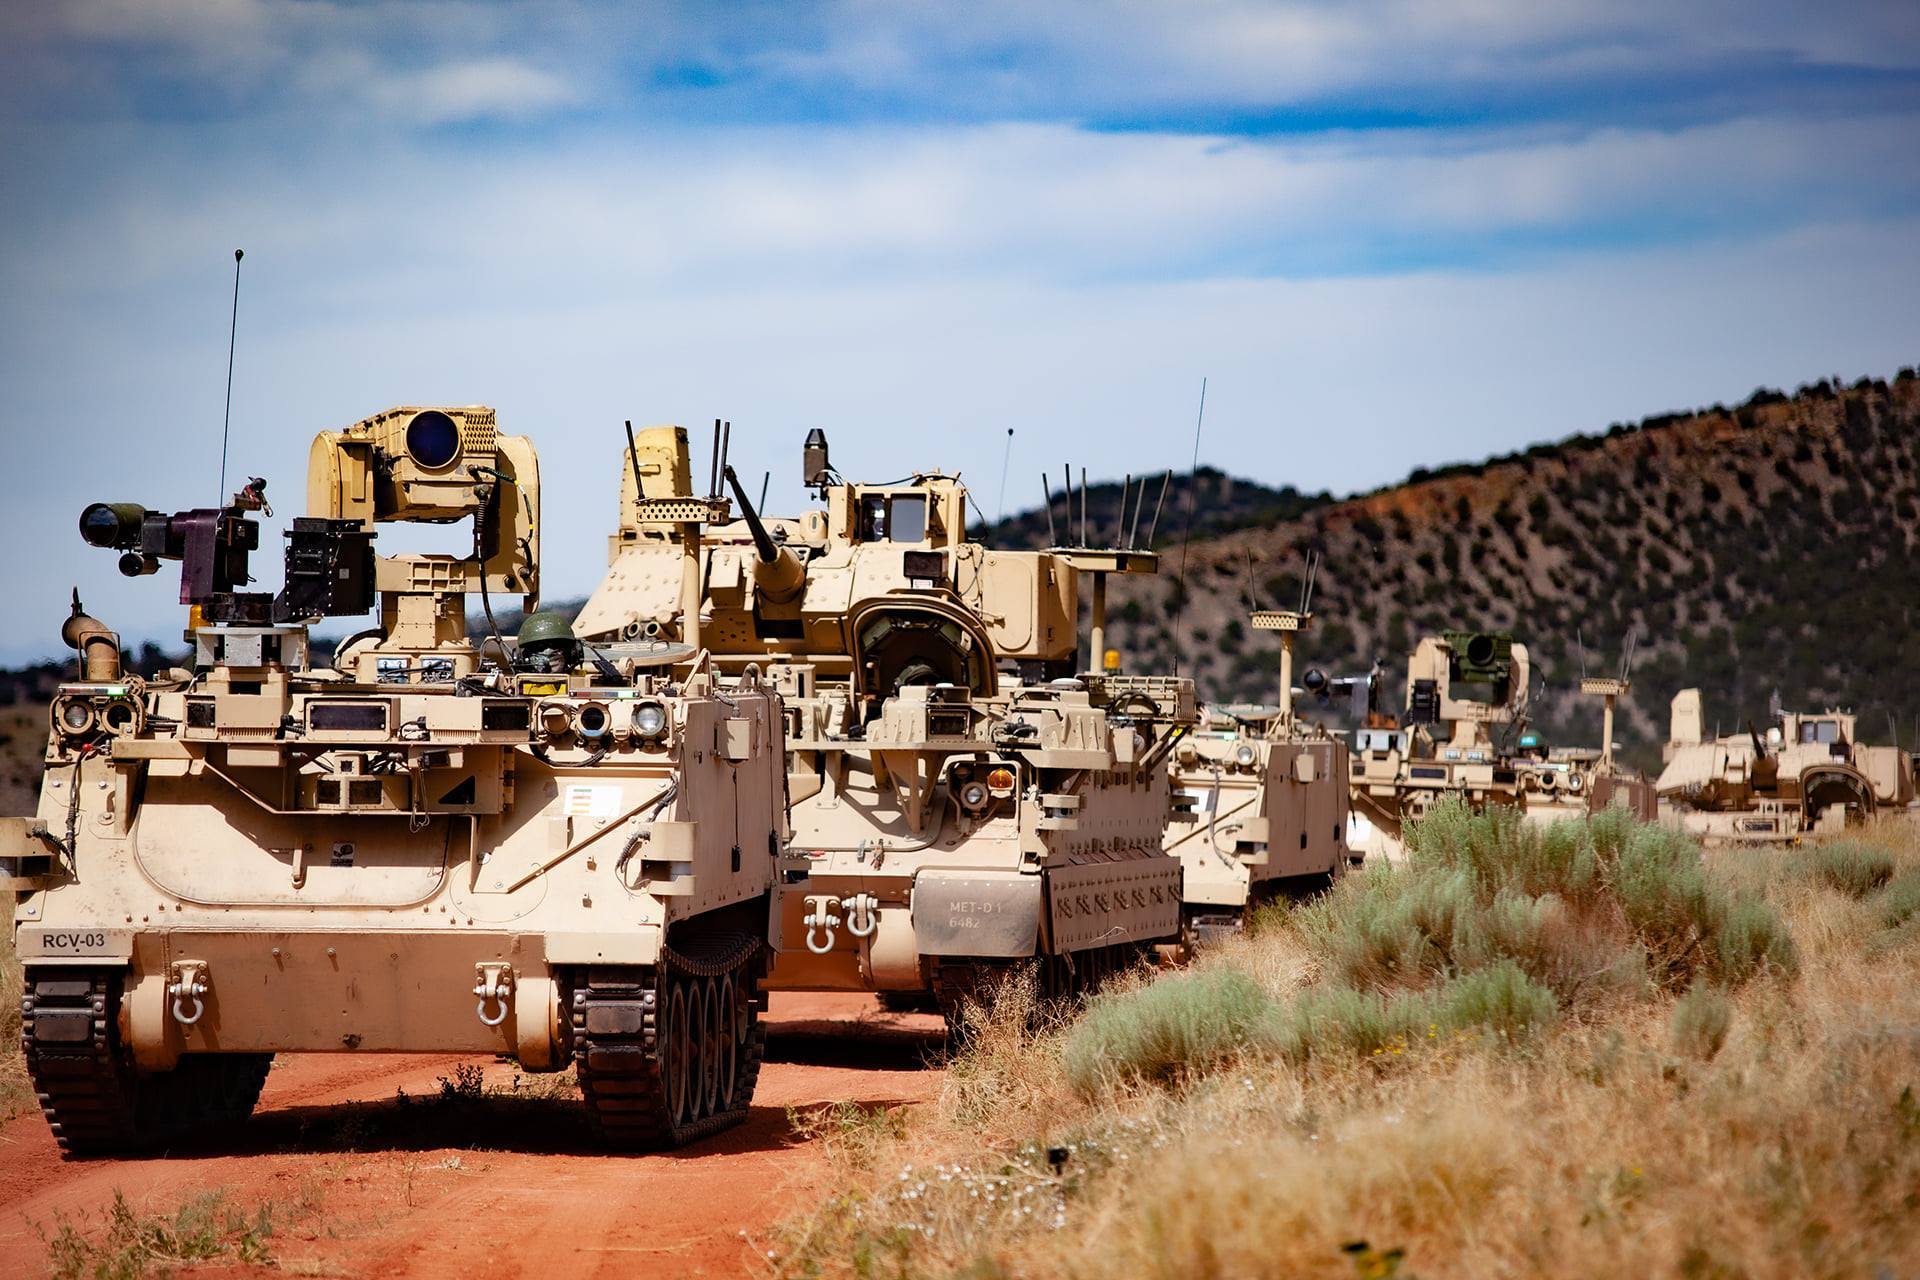 This past summer at Fort Carson, Col., modified Bradley Fighting Vehicles, known as Mission Enabling Technologies Demonstrators, and modified M113 tracked armored personnel carriers, or Robotic Combat Vehicles, were used for the Soldier Operational Experimentation (SOE) Phase 1 to further develop learning objectives for the Manned Unmanned Teaming (MUM-T) concept.